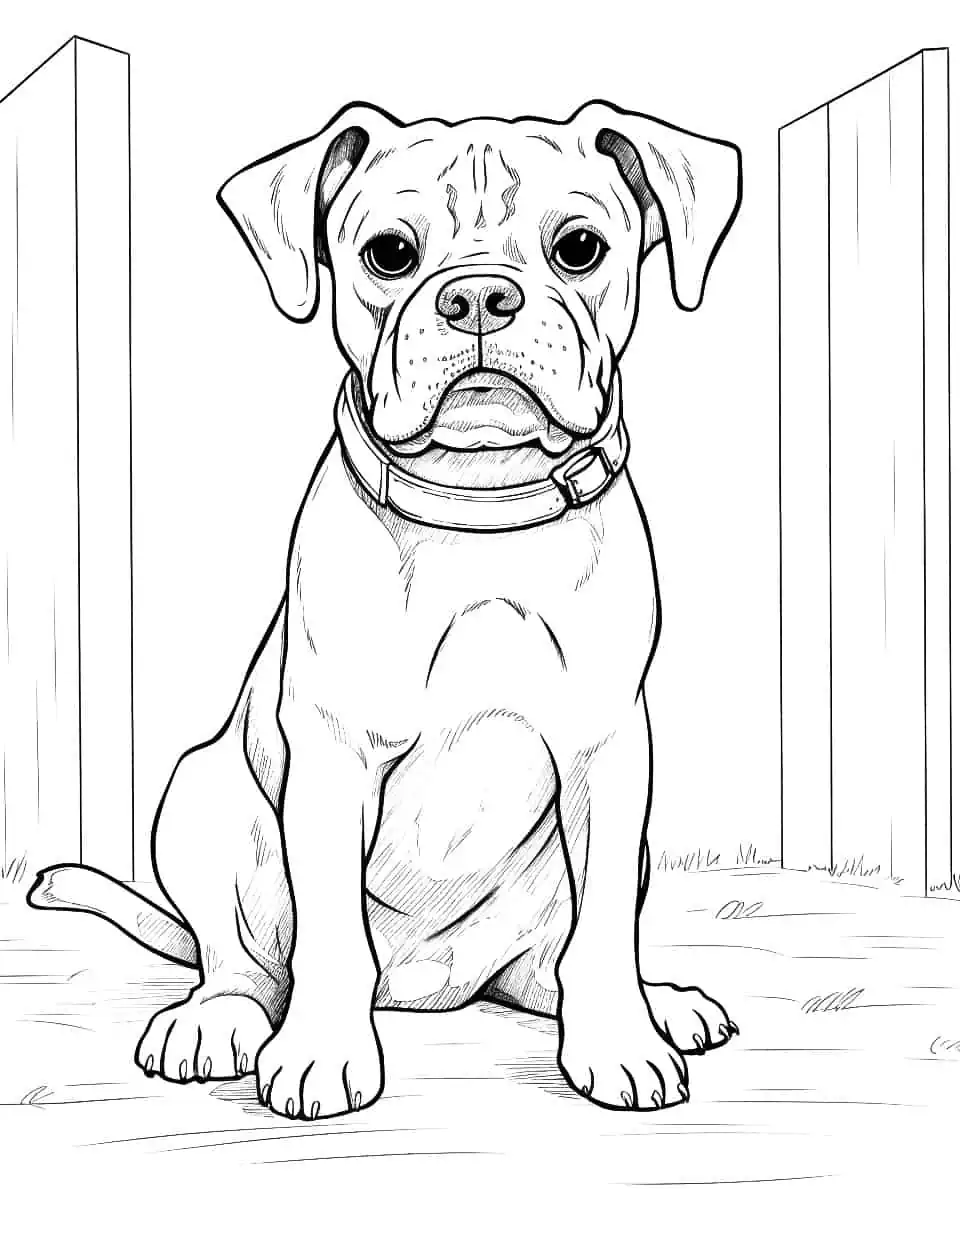 Realistic Boxer Guarding Dog Coloring Page - A detailed, realistic sketch of a Boxer dog guarding its home.